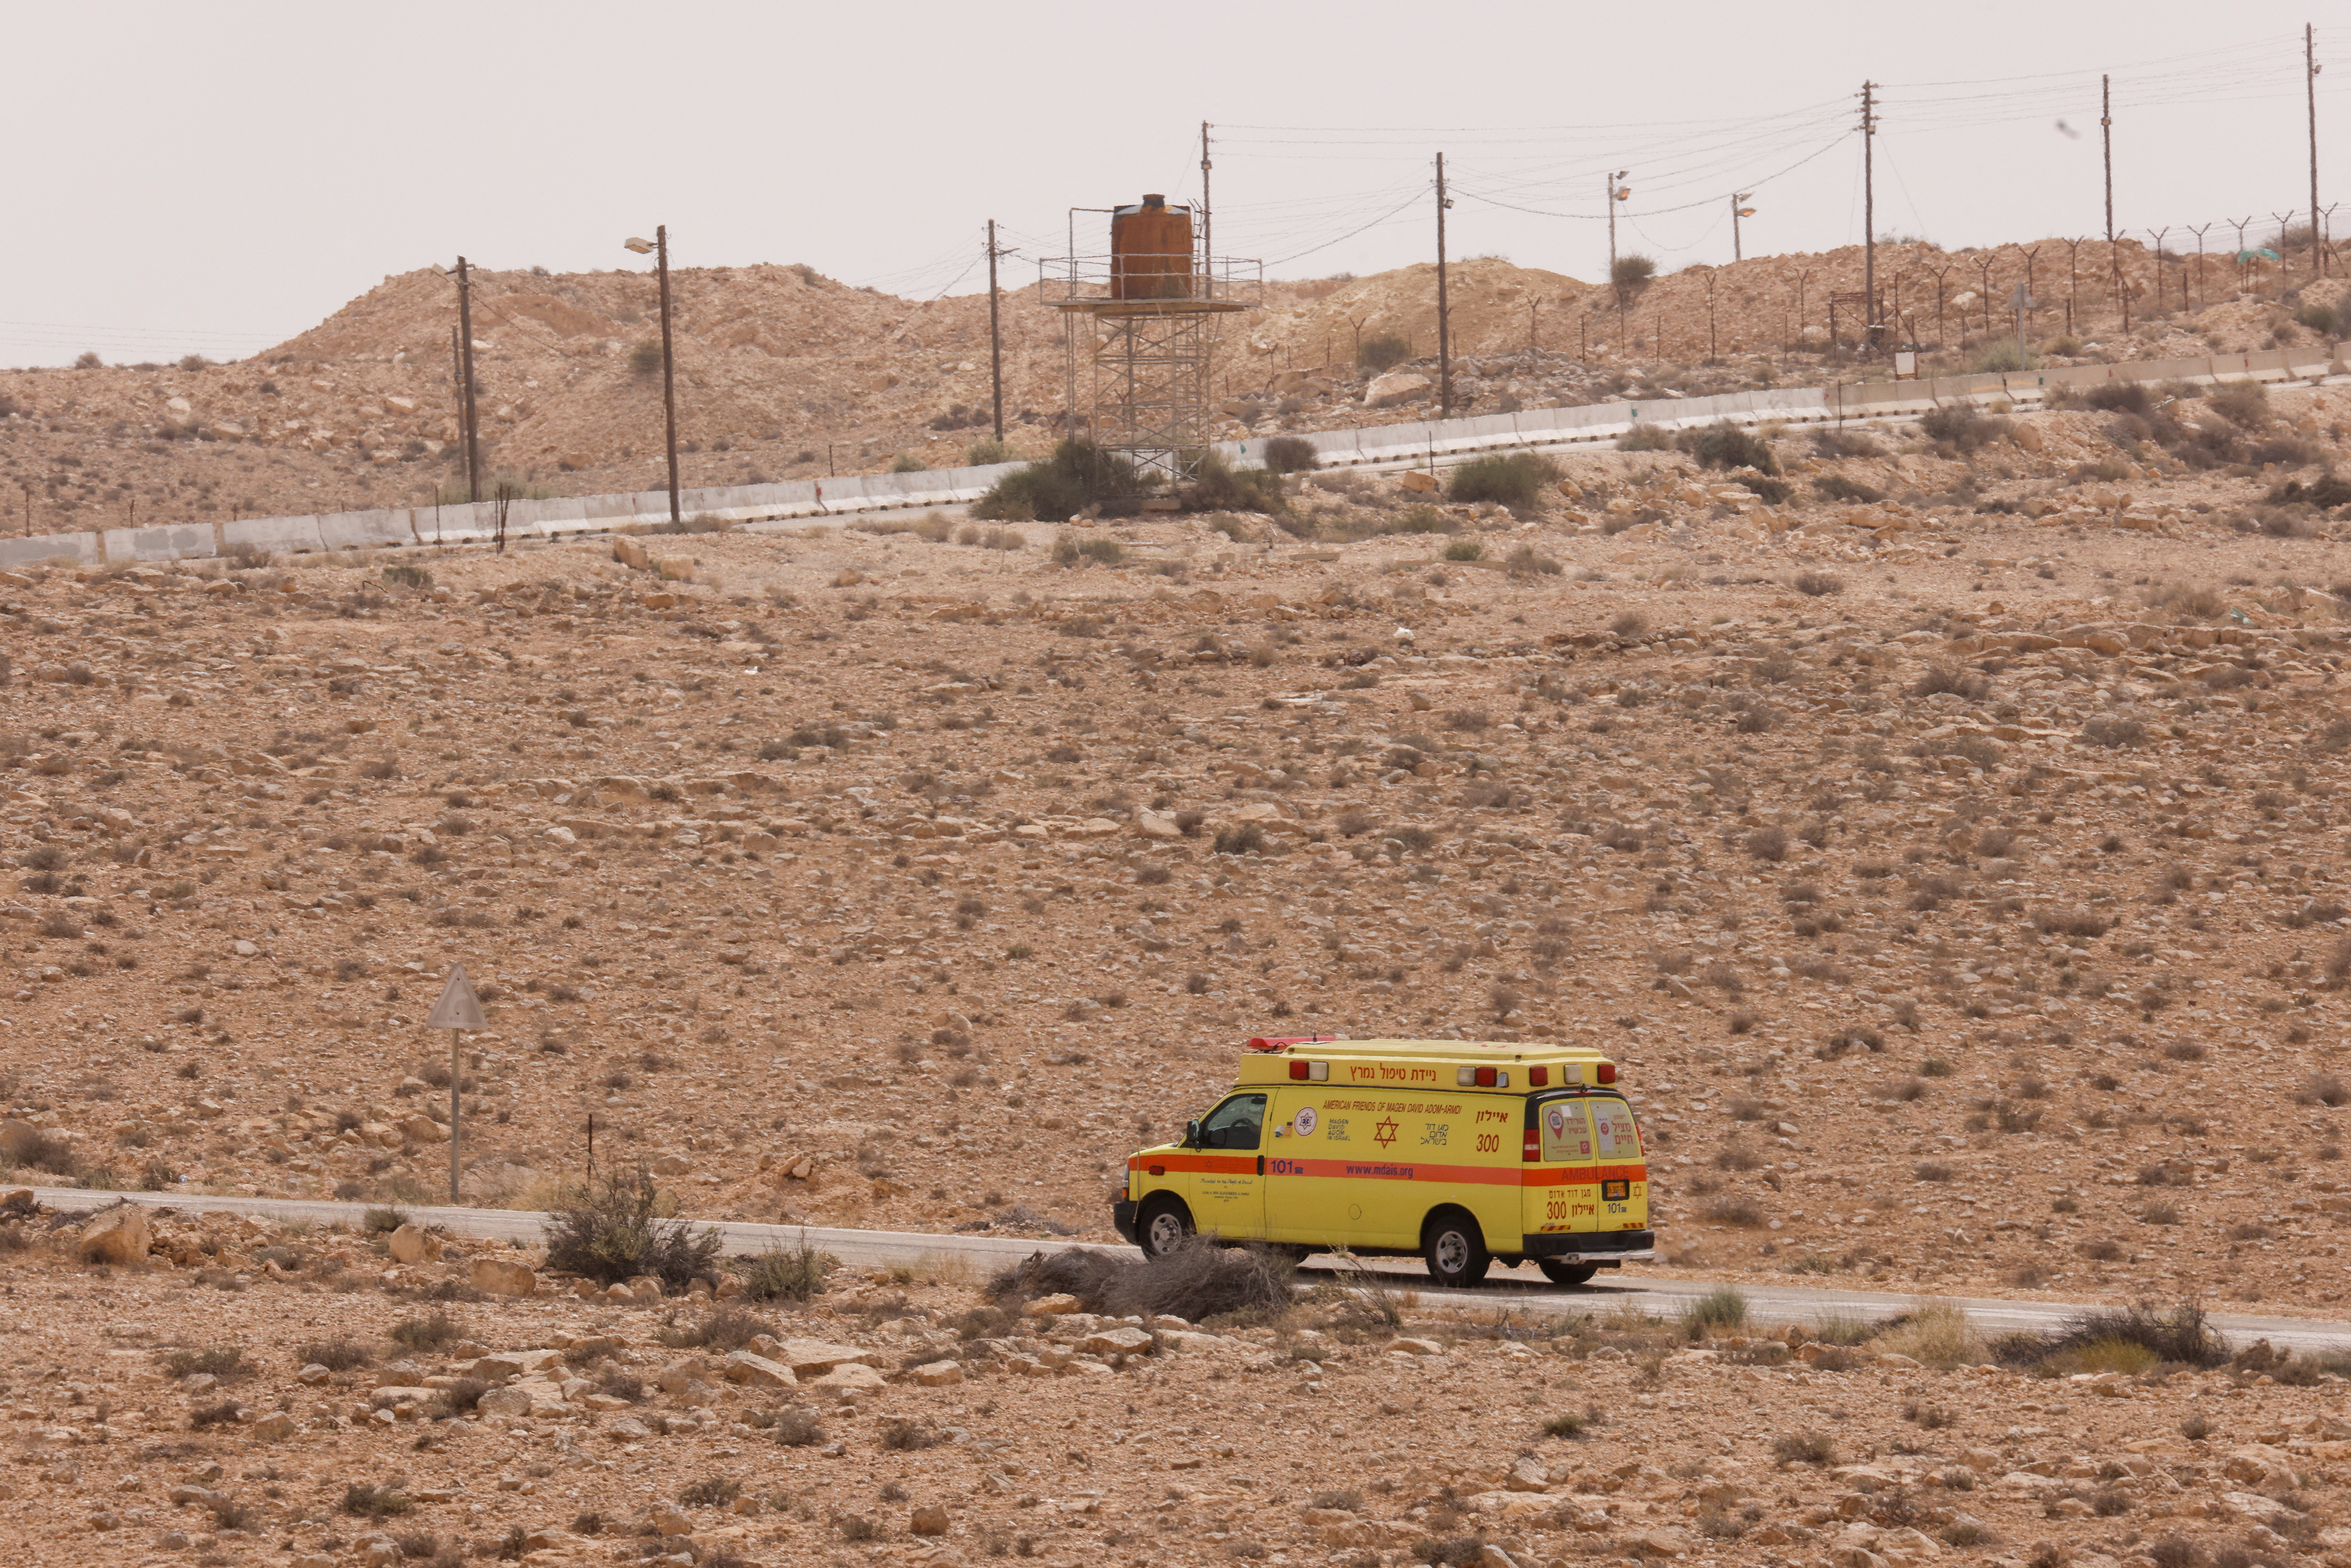 Security incident near Israel's southern border with Egypt